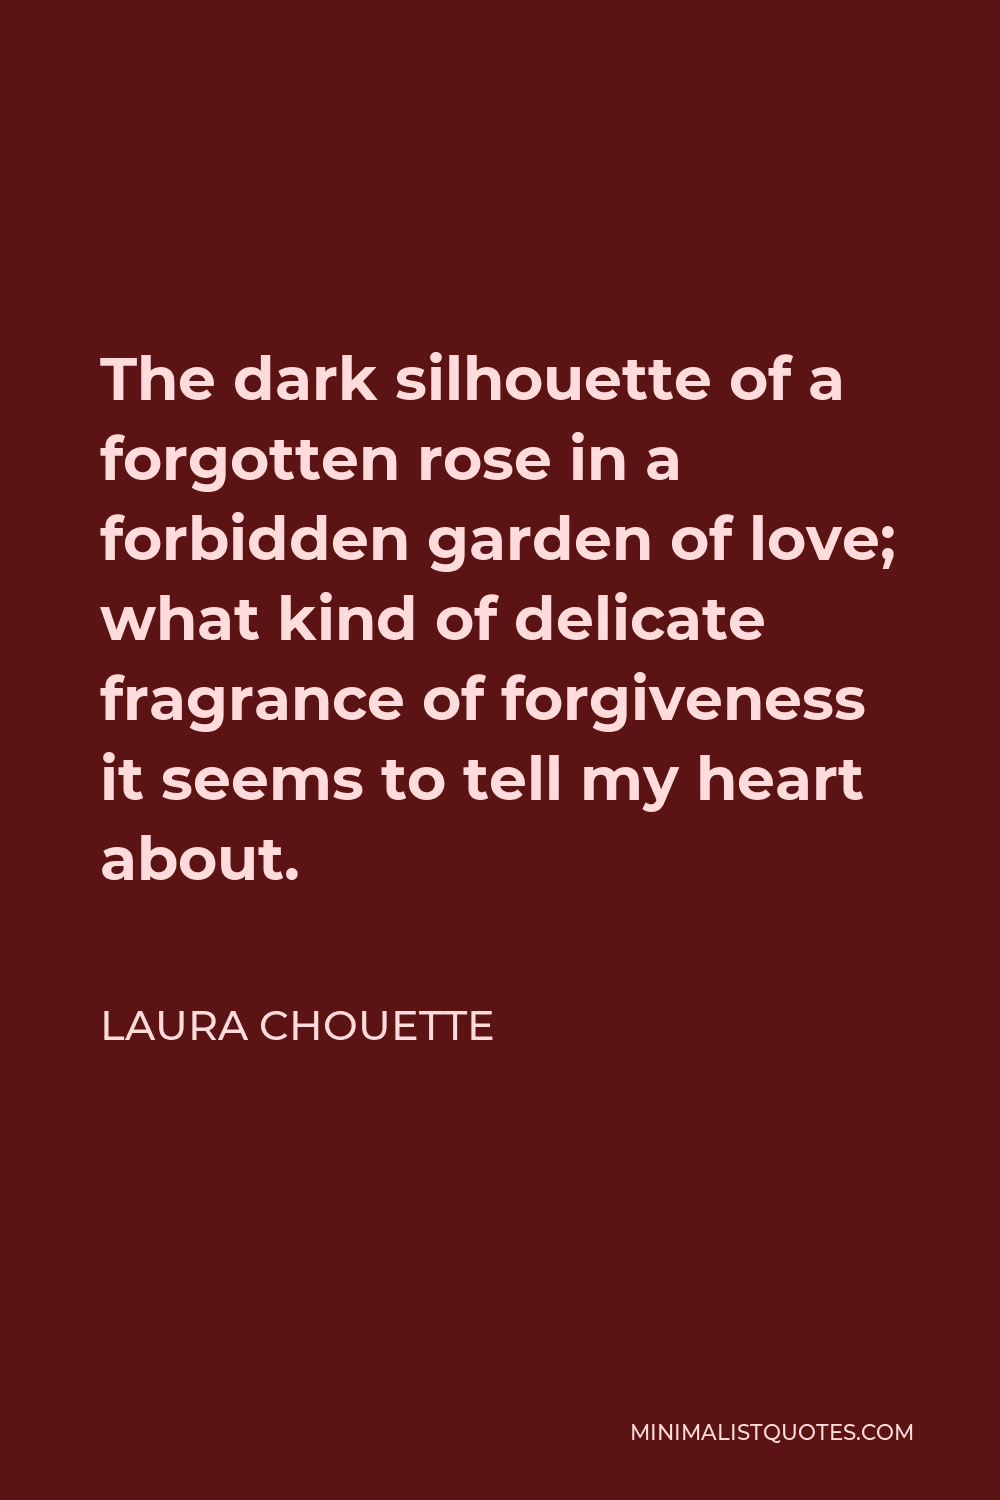 Laura Chouette Quote - The dark silhouette of a forgotten rose in a forbidden garden of love; what kind of delicate fragrance of forgiveness it seems to tell my heart about.